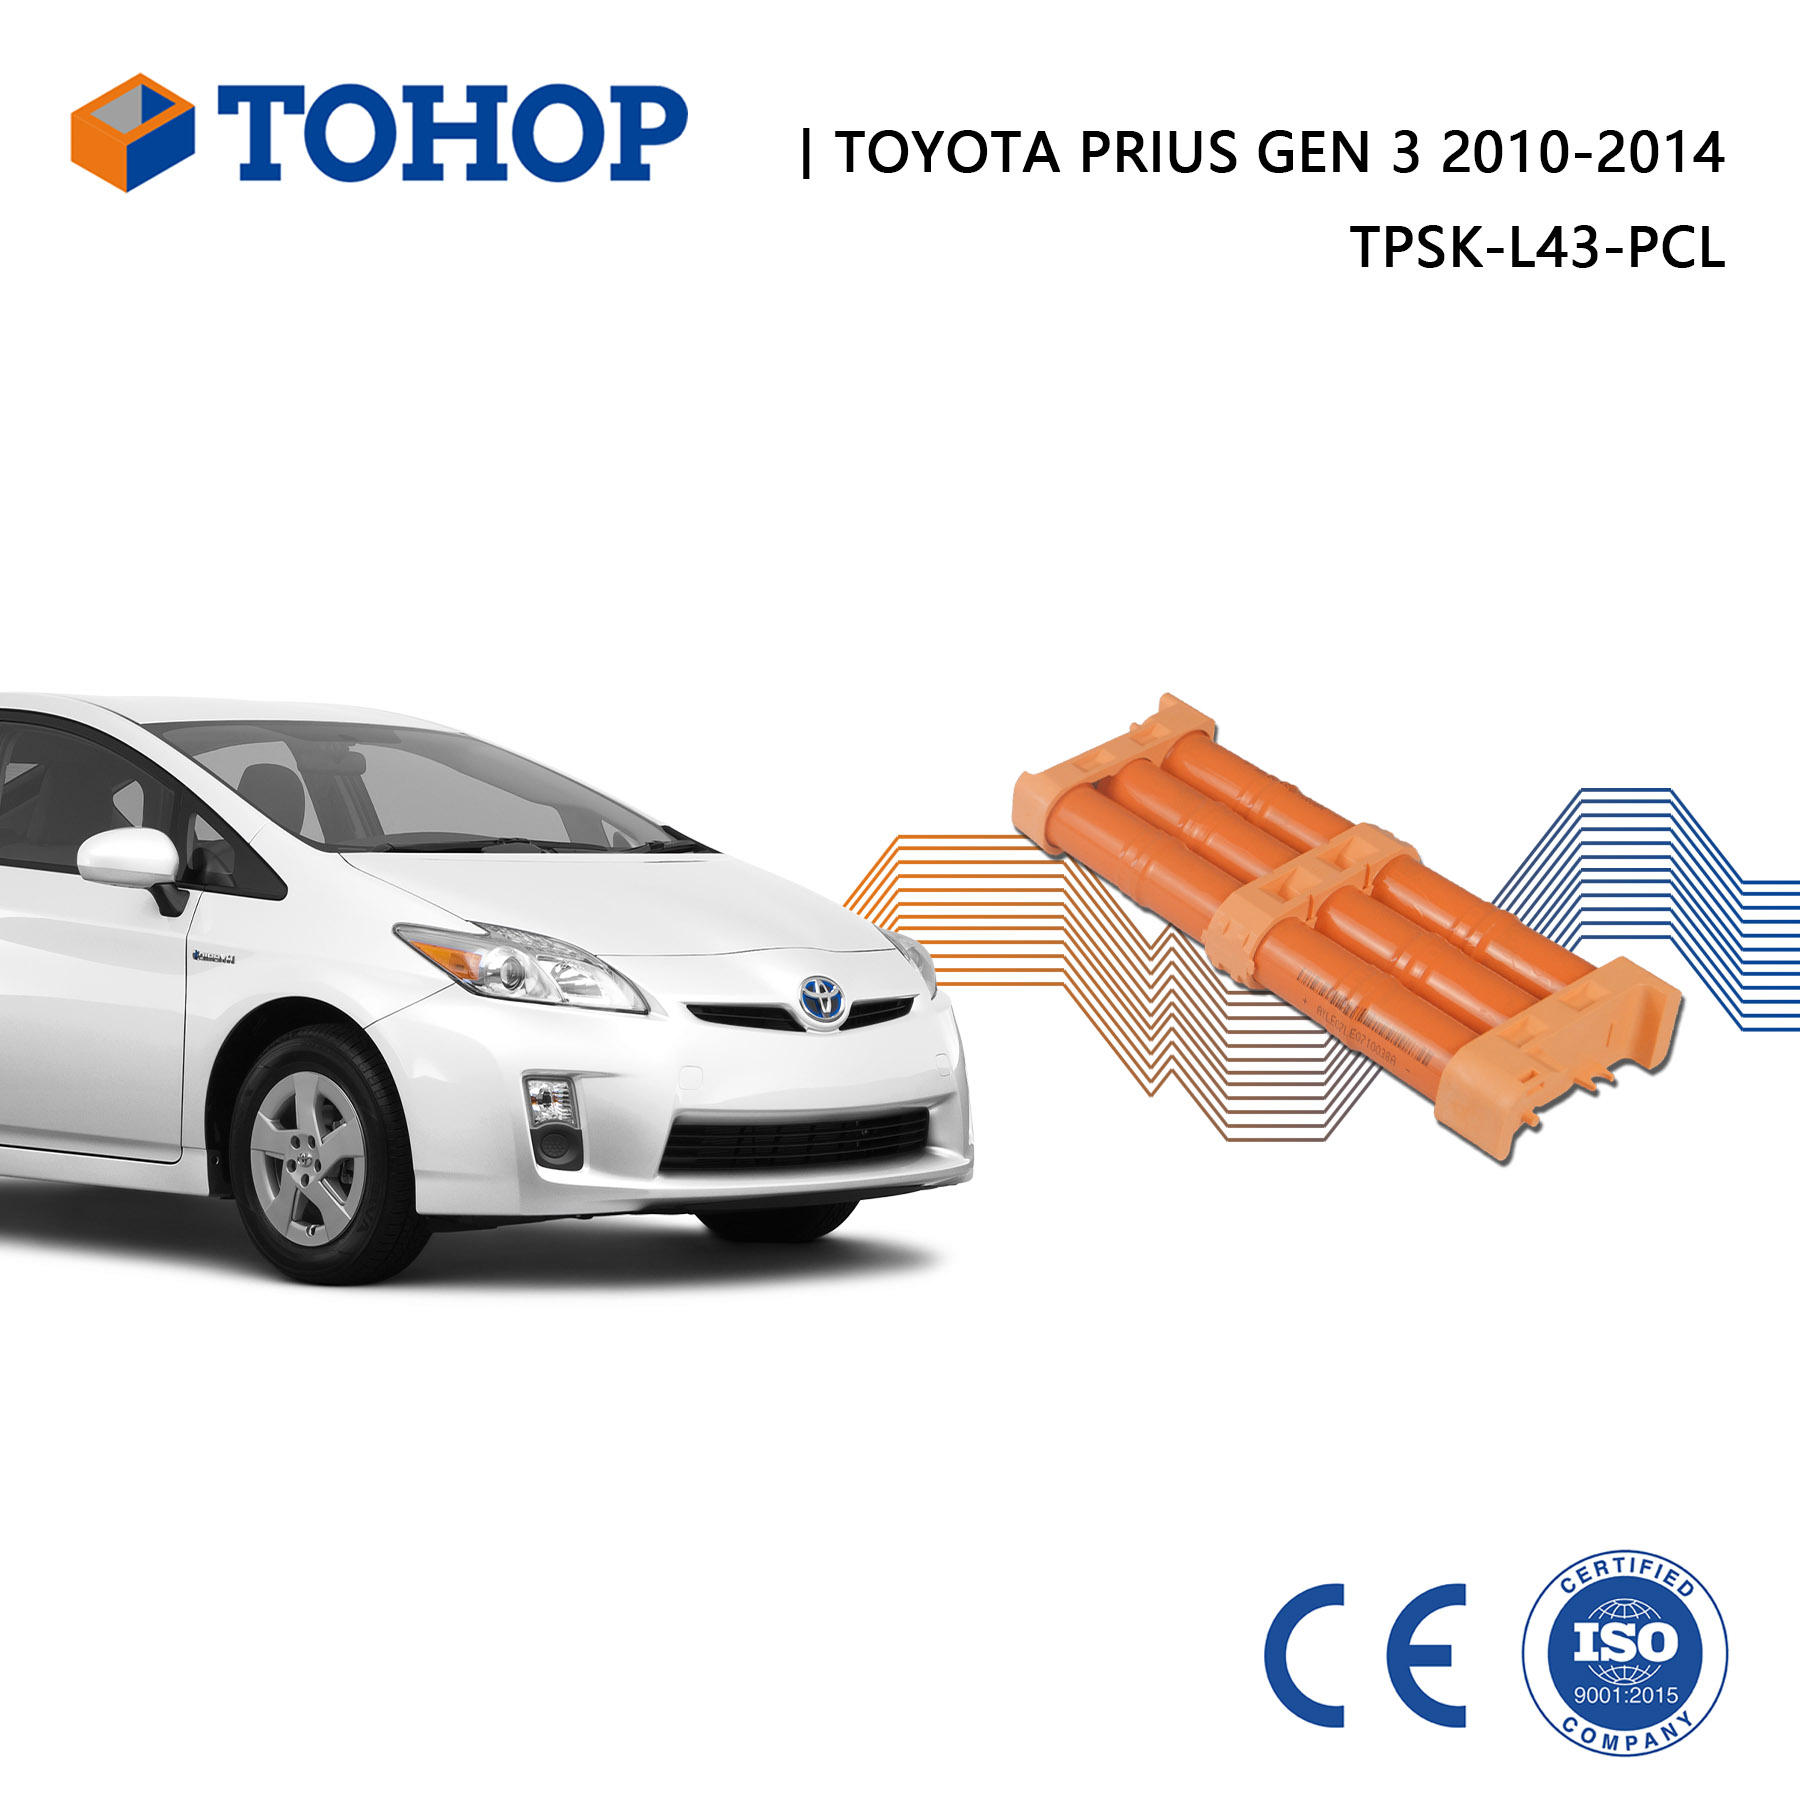 Gen 3 Prius Hybrid Battery Replacement 14.4V 6.5Ah Nimh Cell